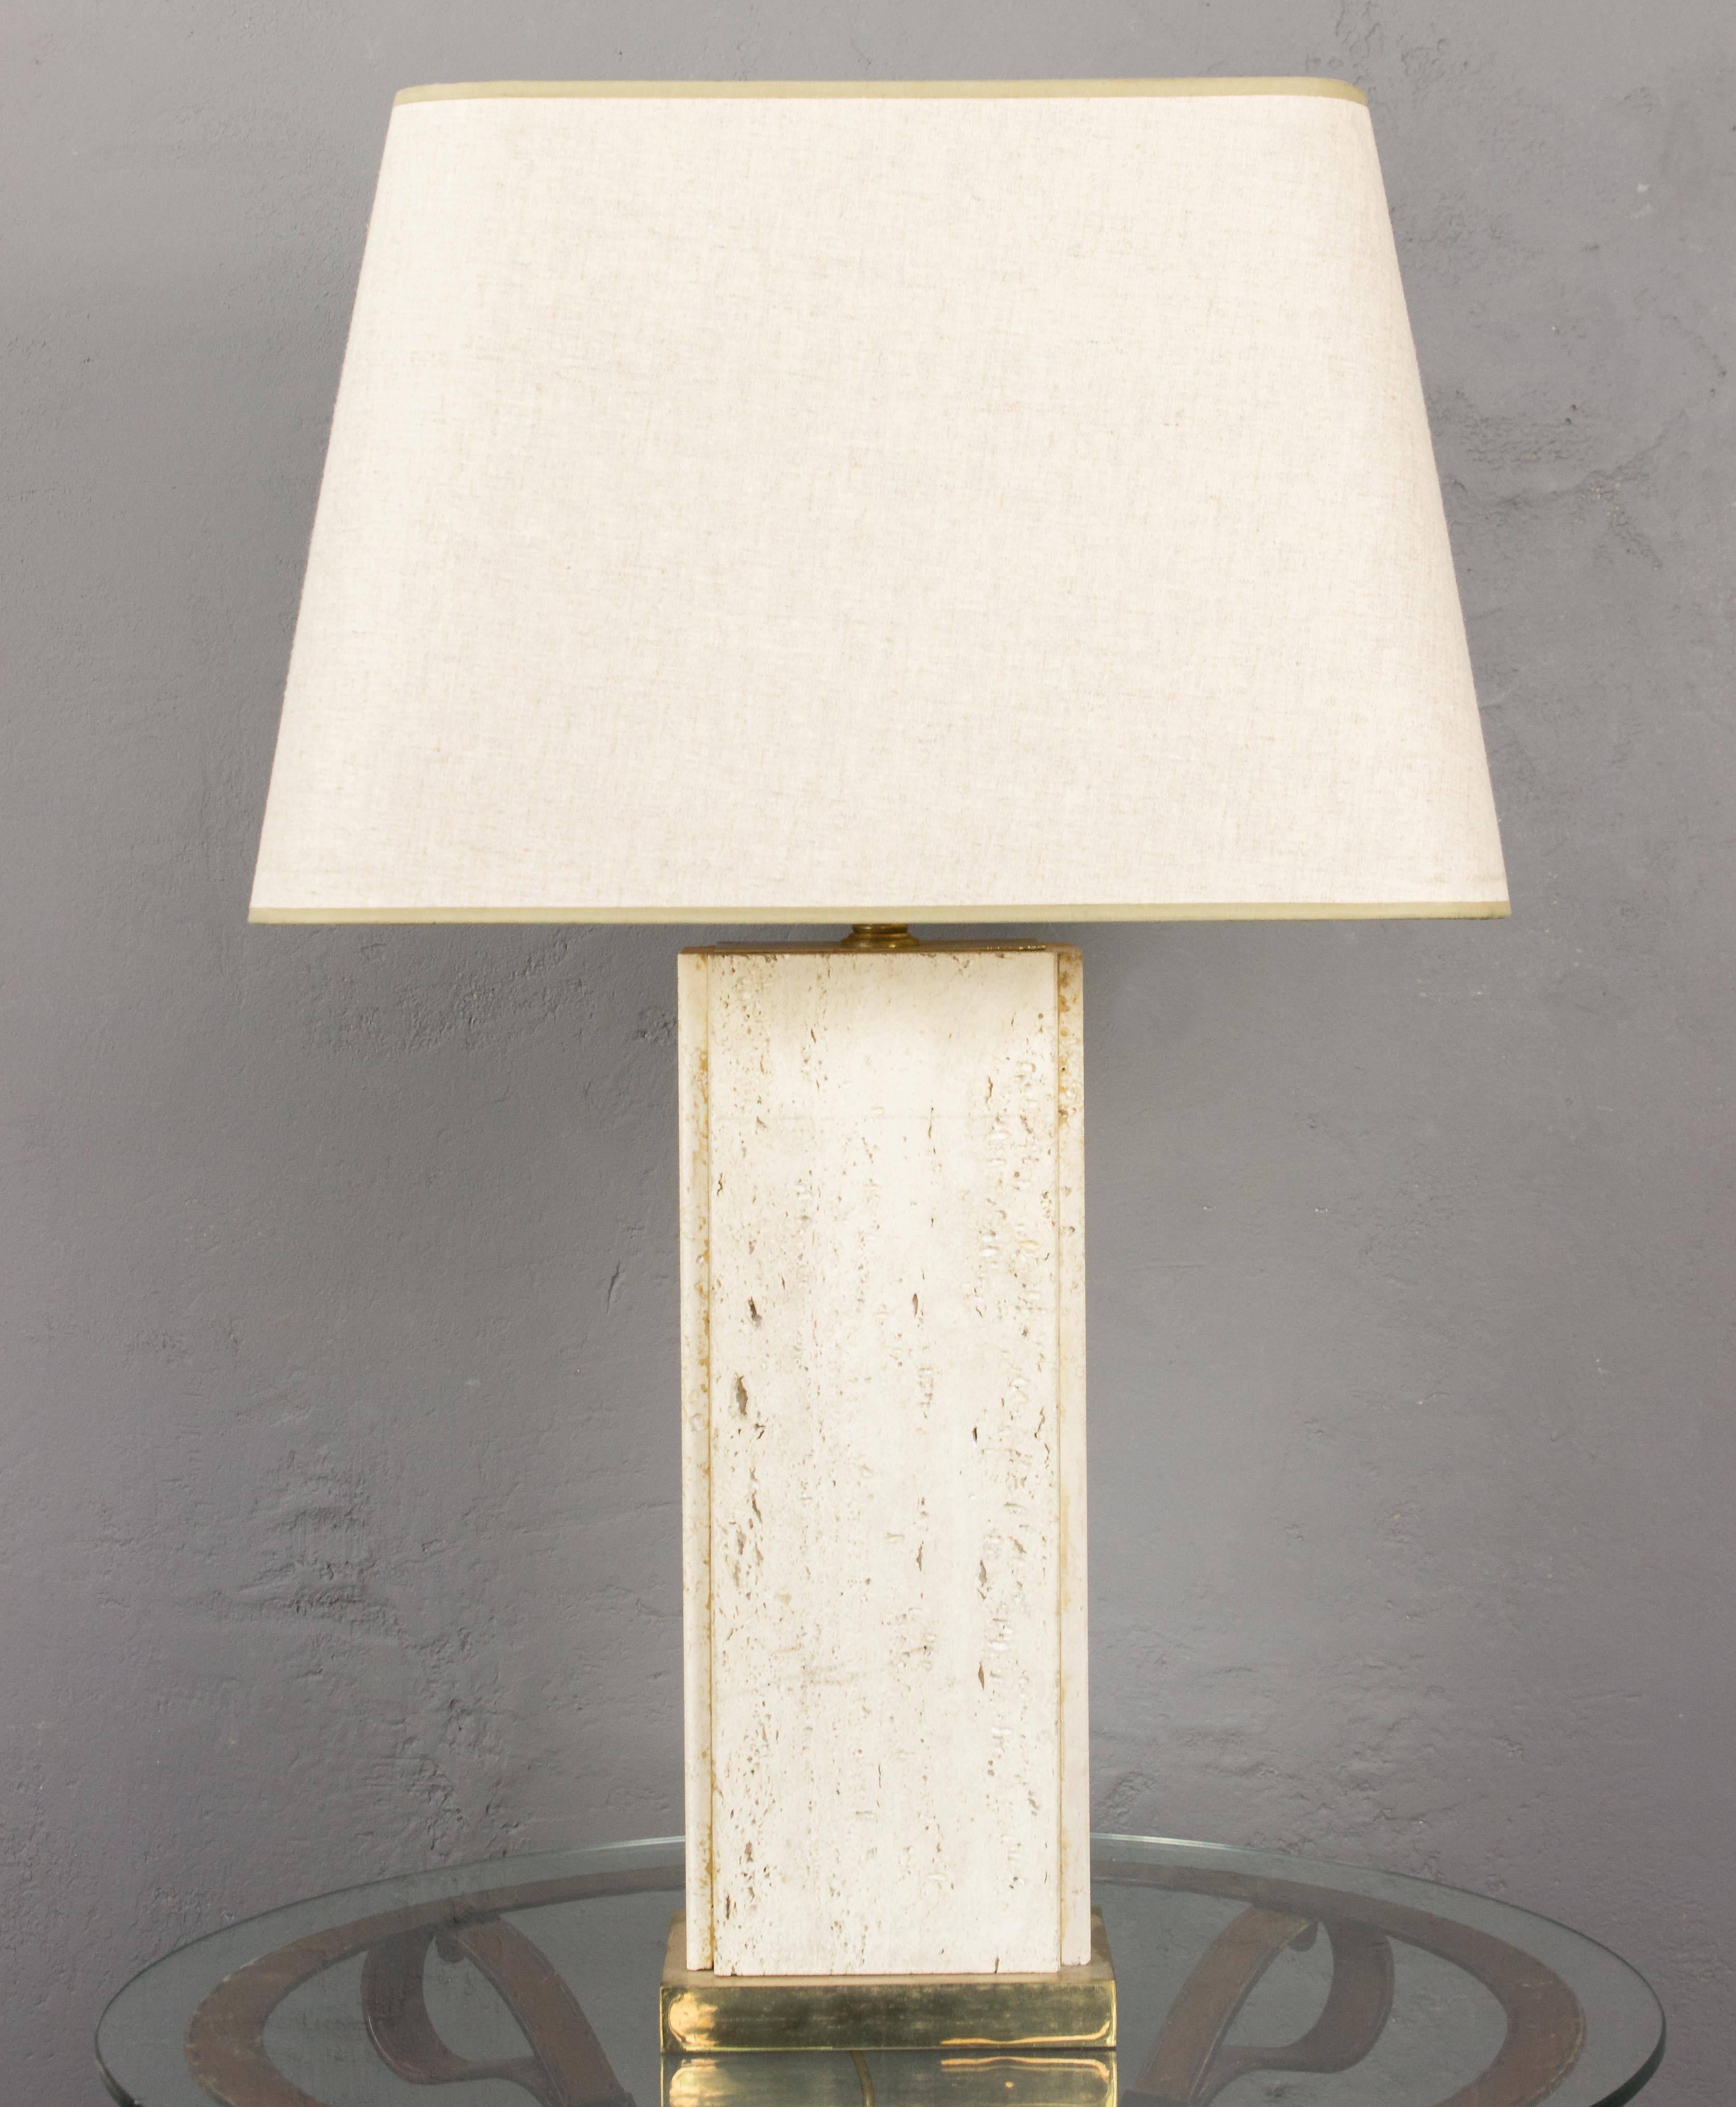 This remarkable French lamp from the mid-20th century features a large and impressive rectangular porous travertine body resting on a rectangular brass base. This unique piece has recently been rewired, ensuring its functionality and safety. The